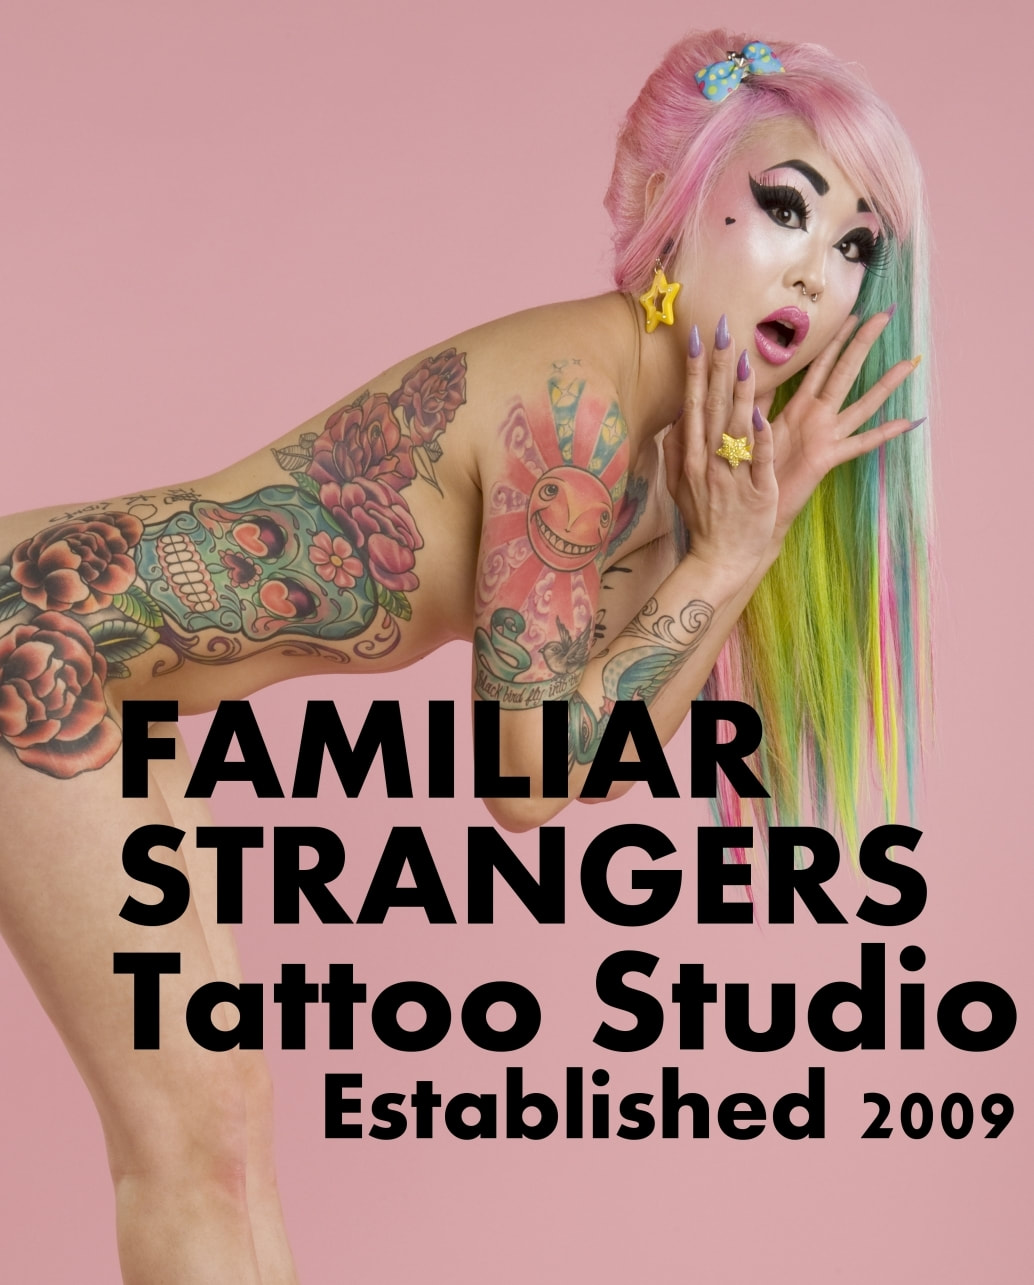 FAMILIAR STRANGERS - Best Rated Tattoo Studio in Singapore - Quality Tattoos from a Singapore Tattoo Studio